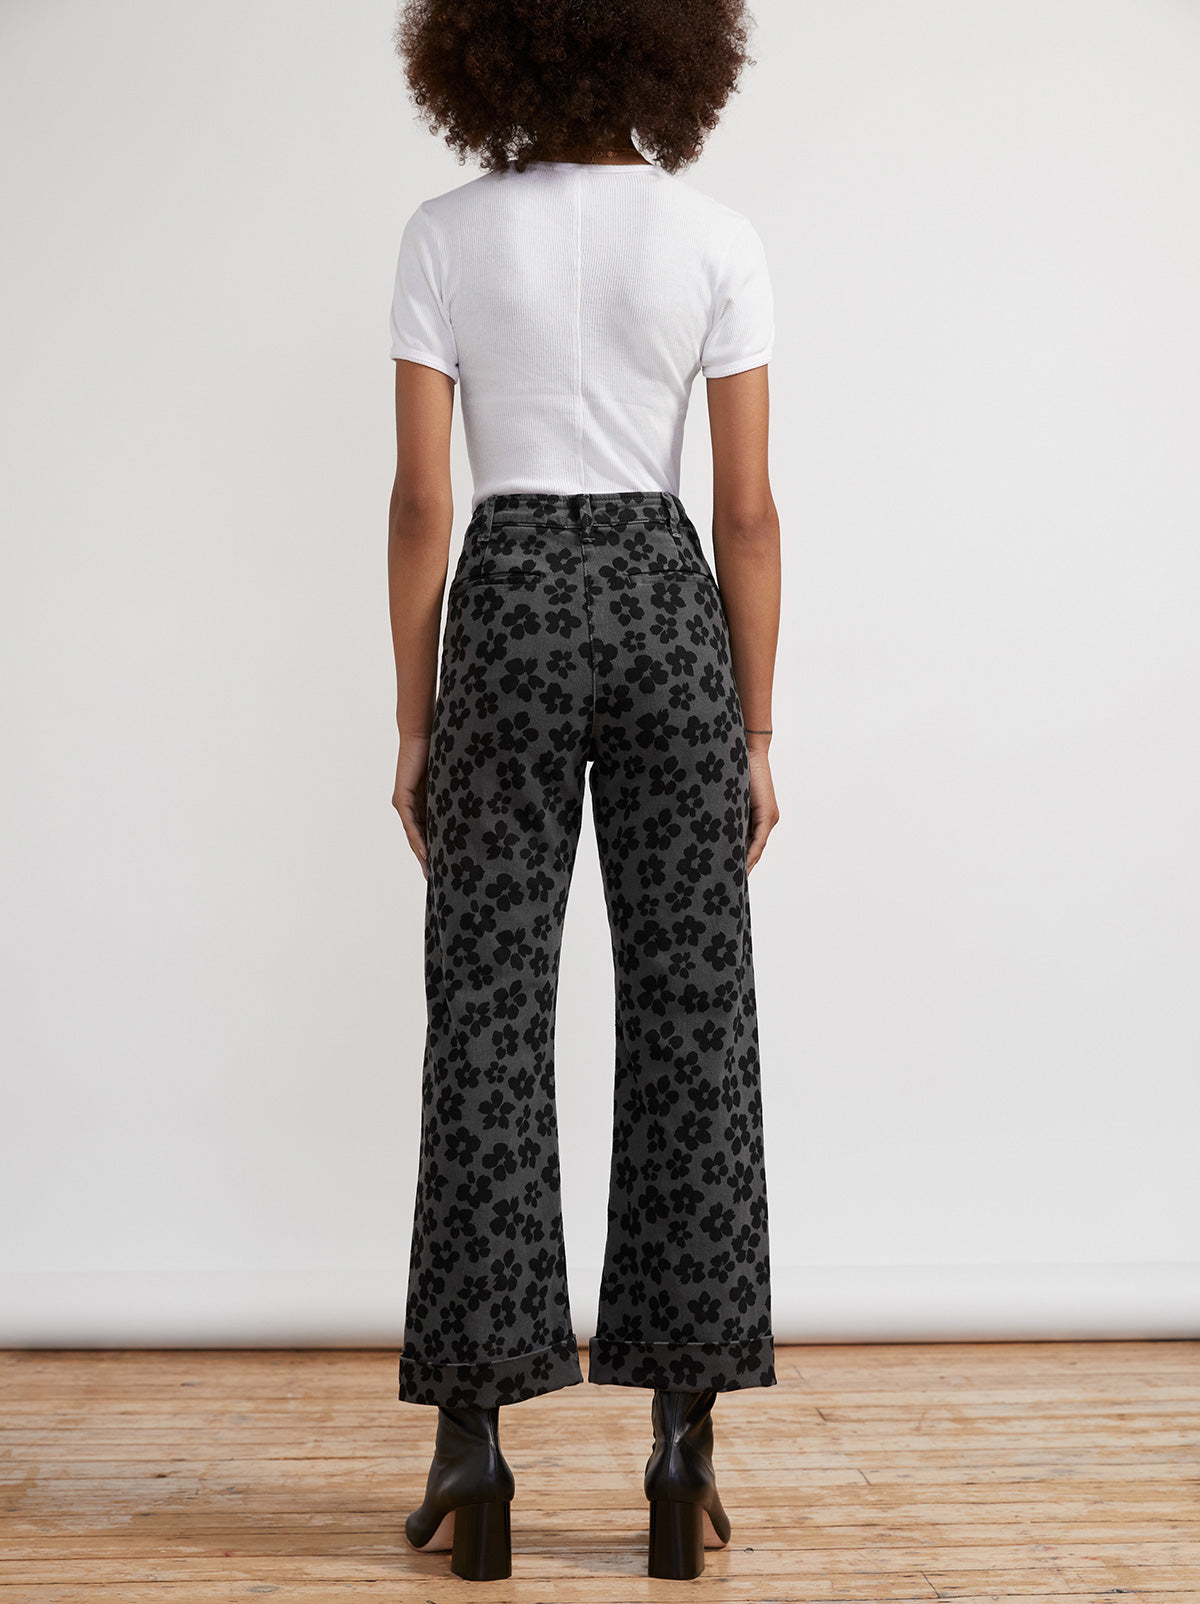 Faith Grey Floral Printed Trousers By KITRI Studio